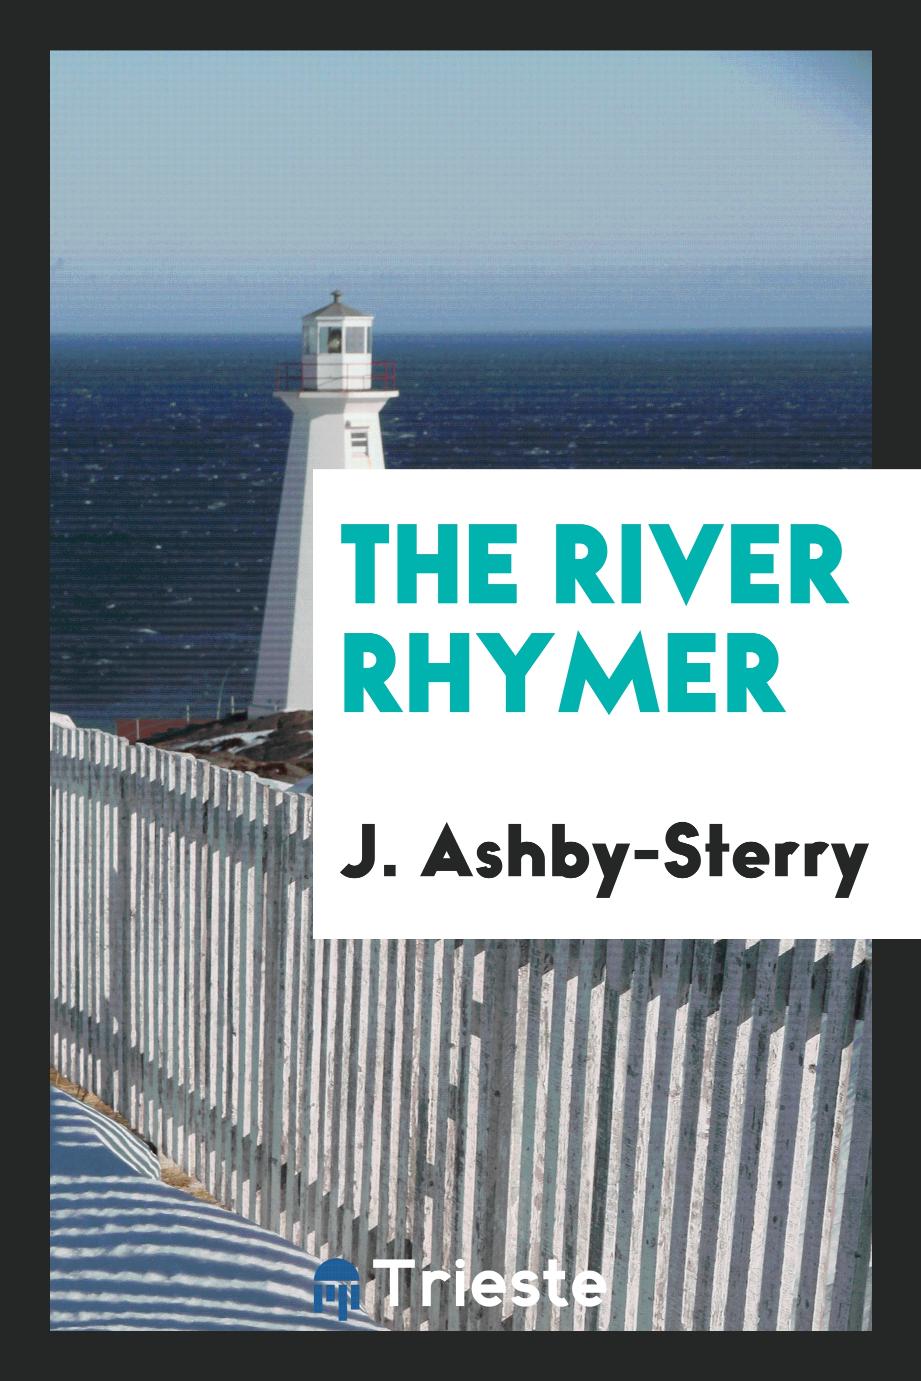 The river rhymer